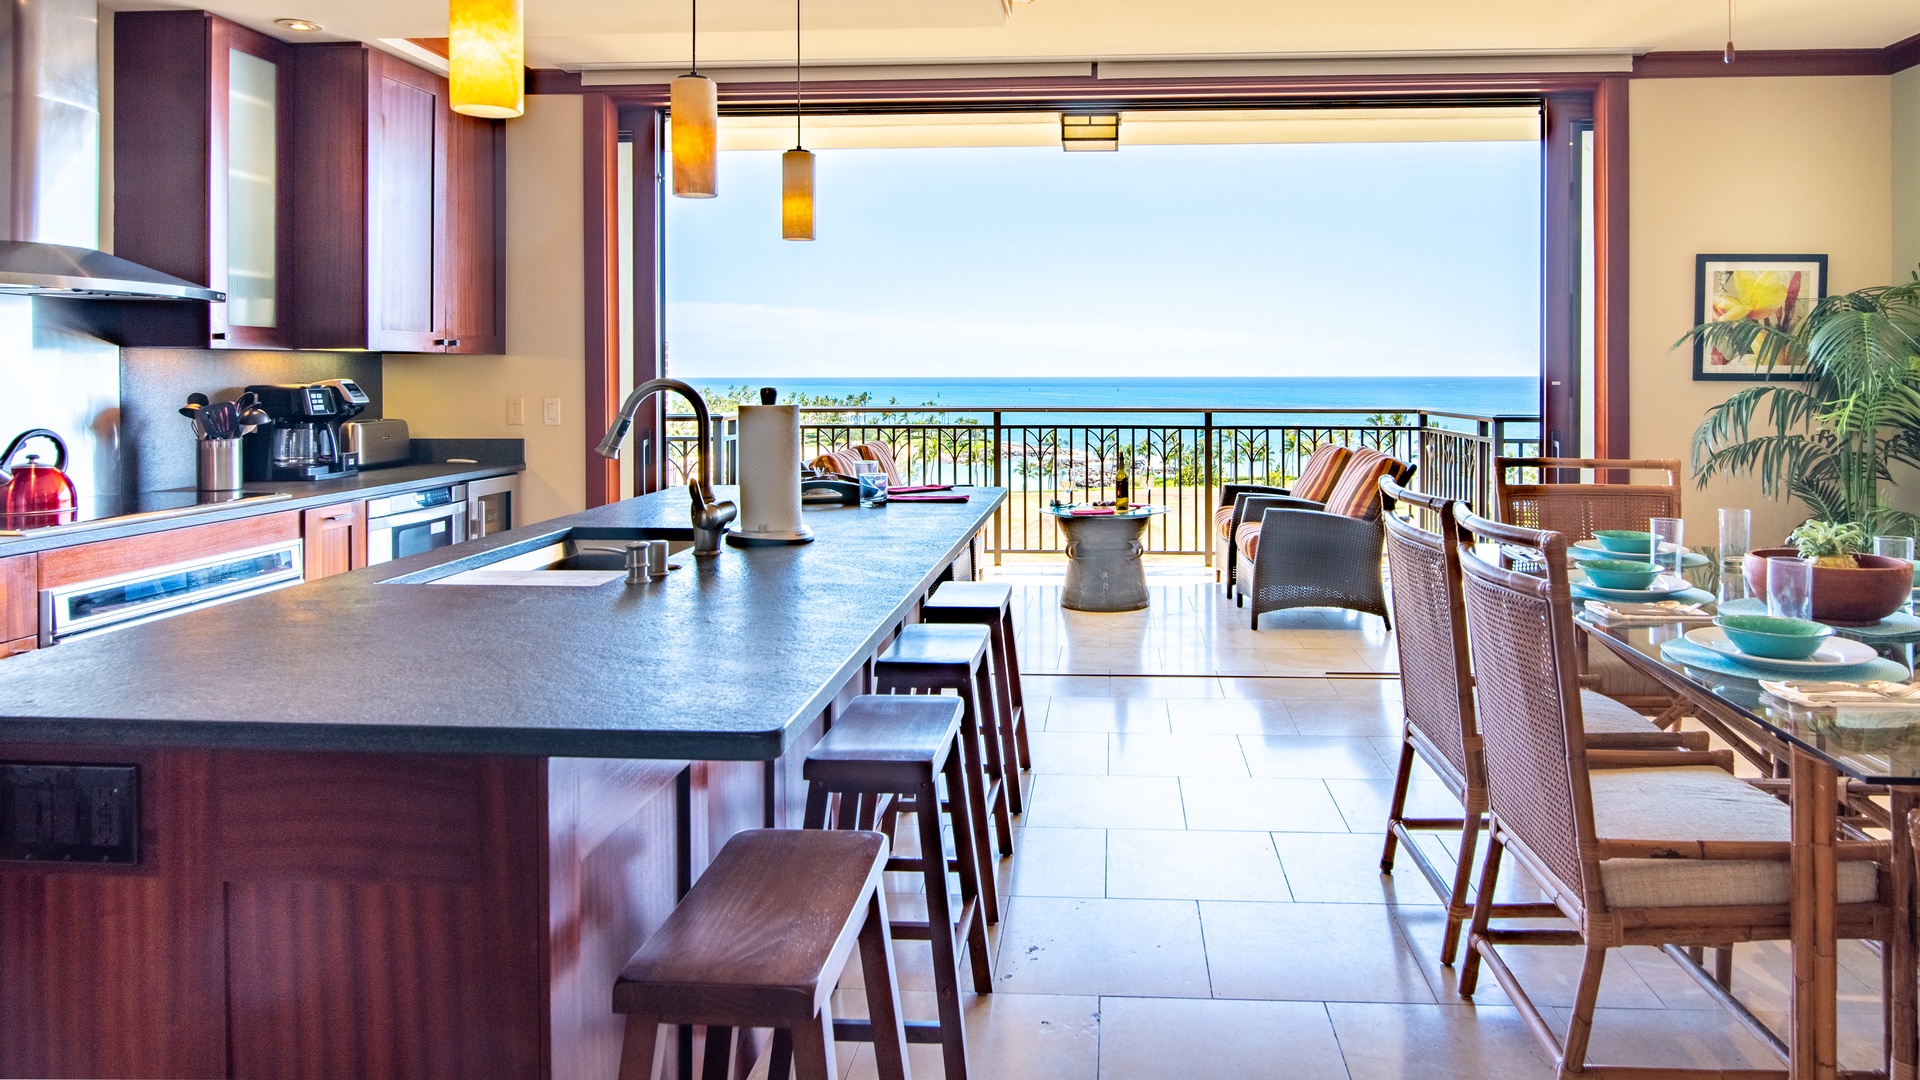 Kapolei Vacation Rentals, Ko Olina Beach Villas B901 - Enjoy the bar seating in the kitchen or formal dining with ocean breezes.